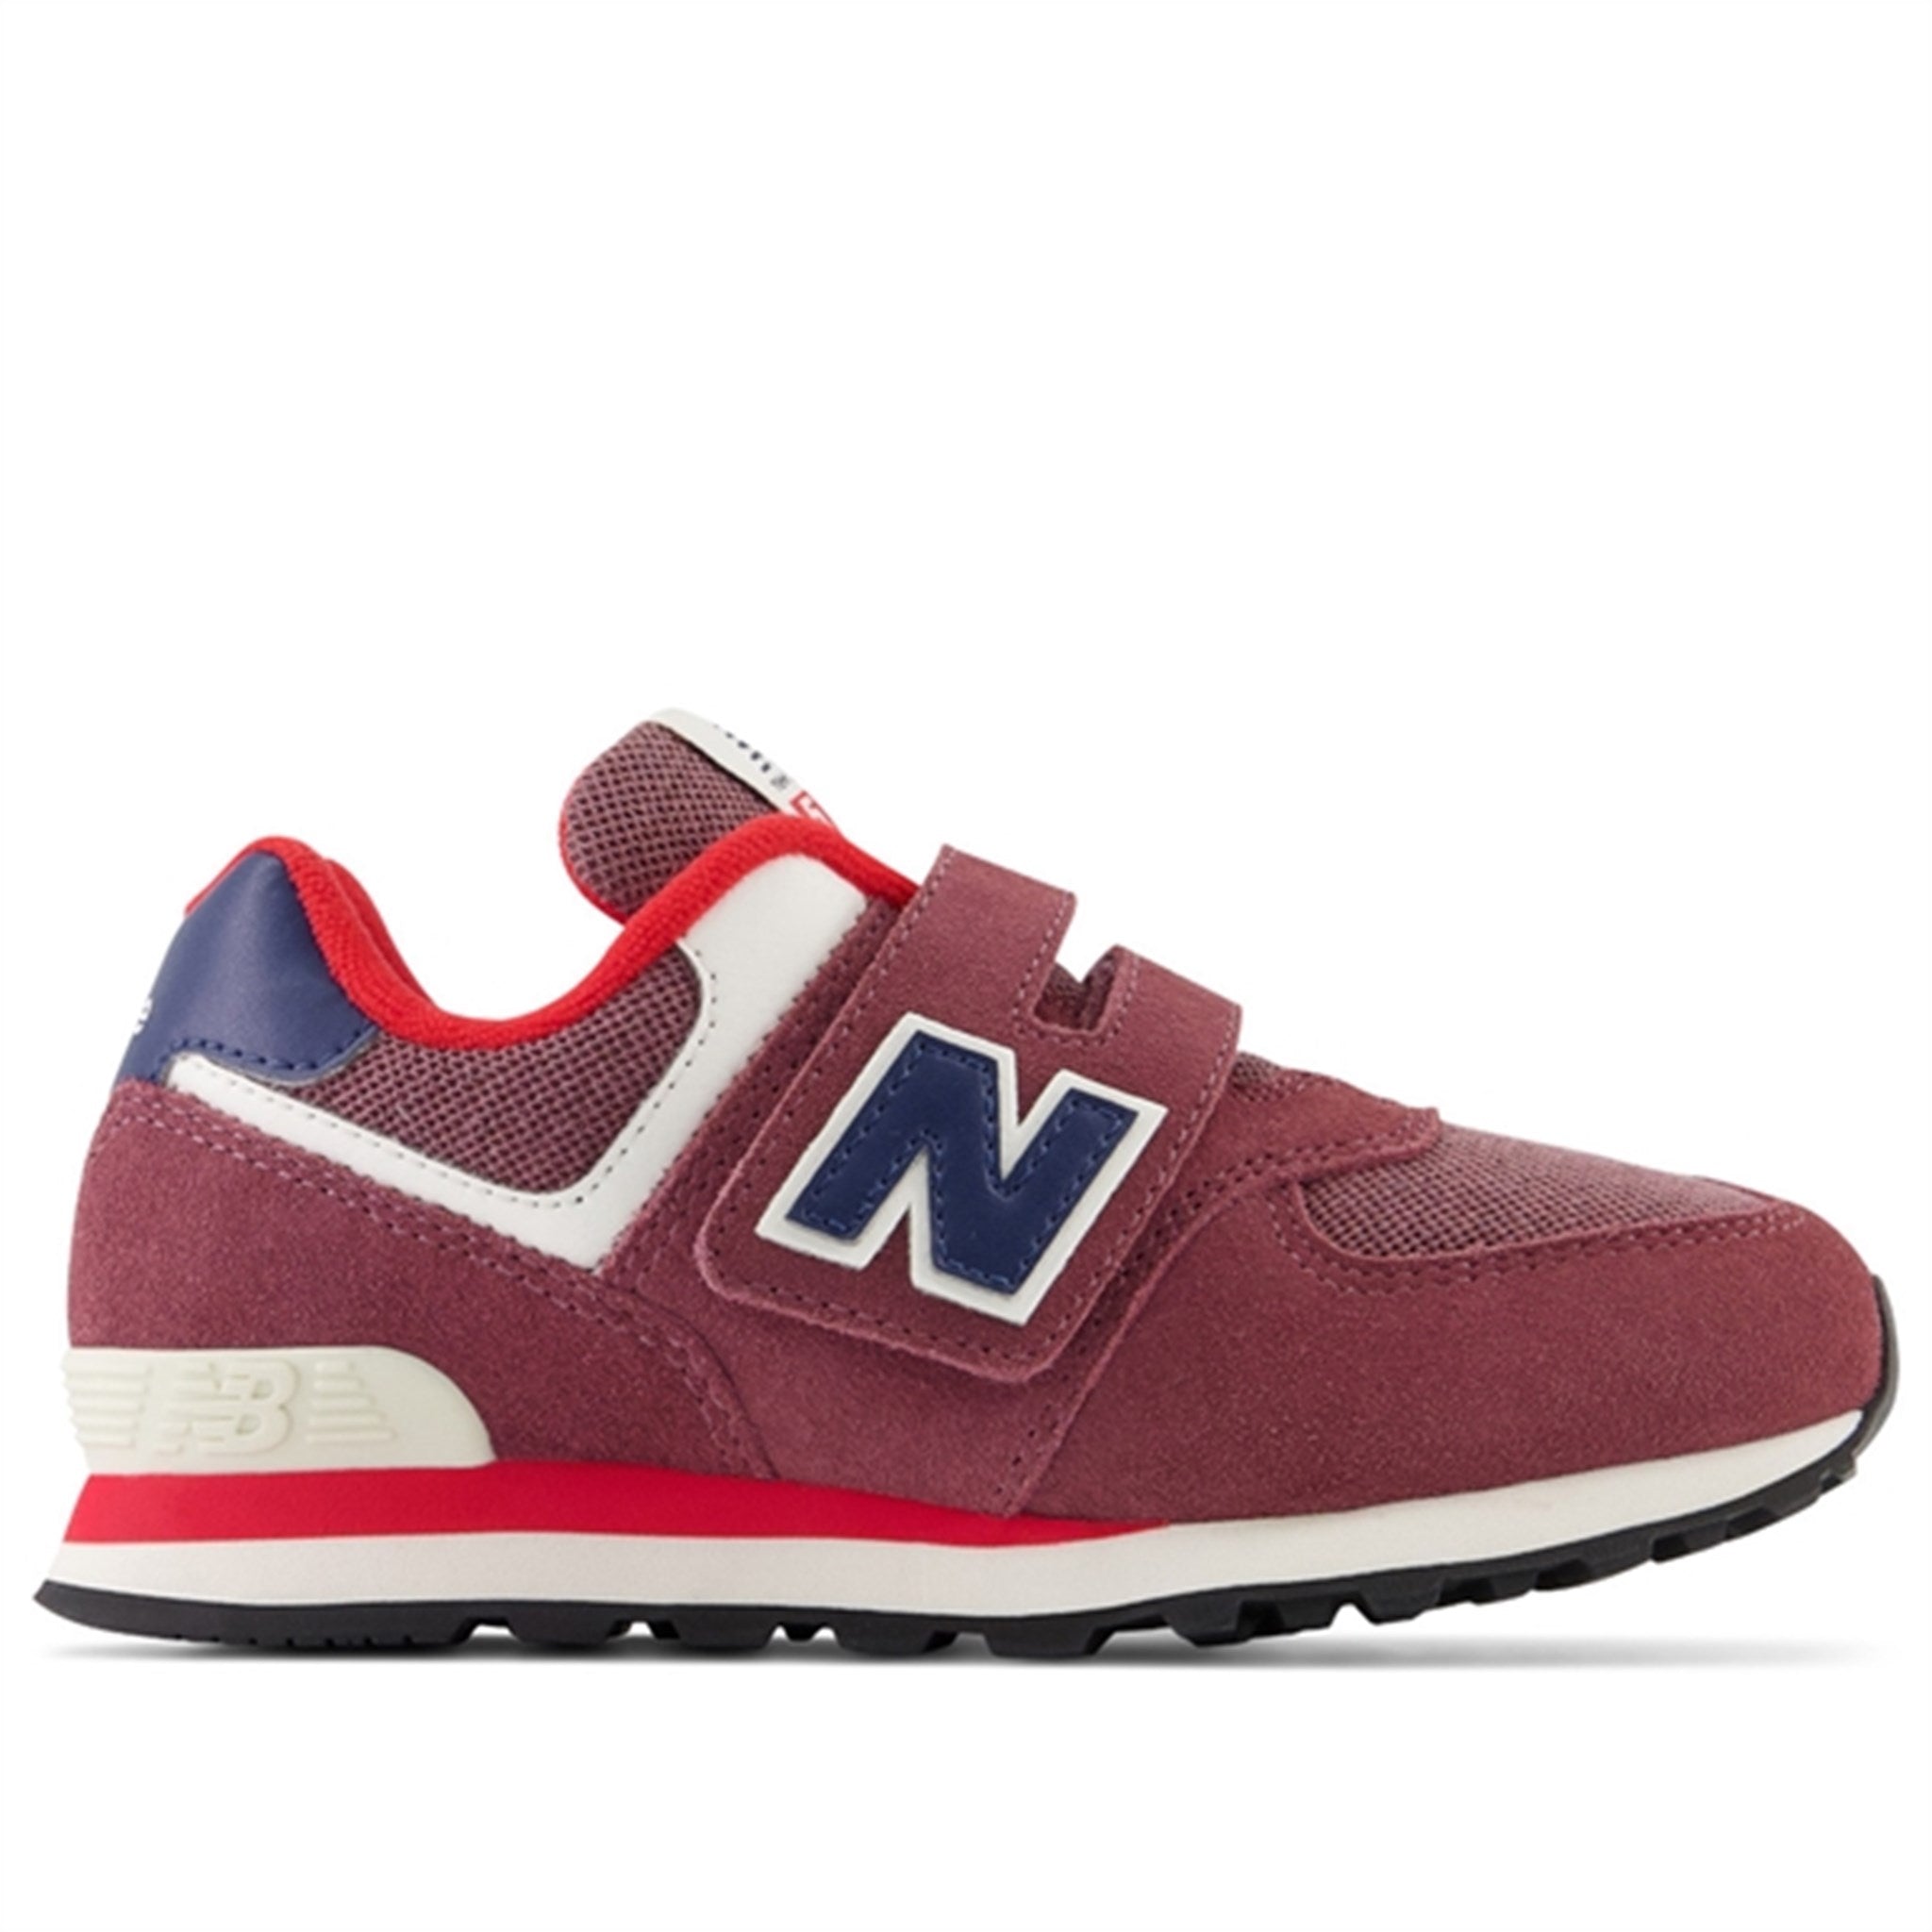 New Balance 574 Washed Burgundy Sneakers